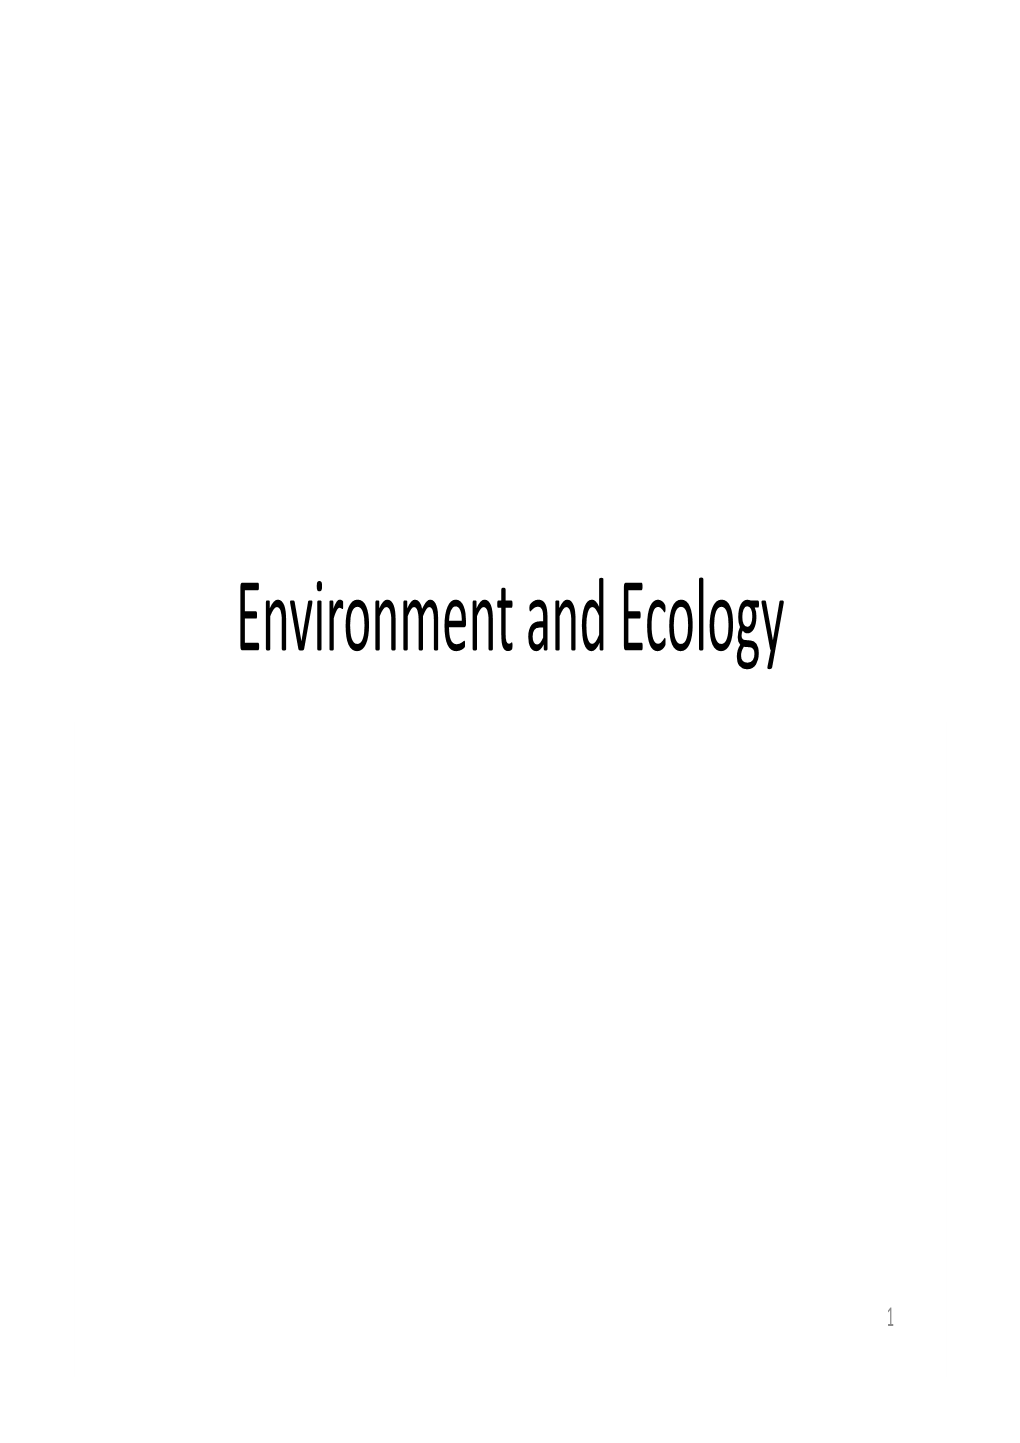 CE 1101: Study Material Ecosystems